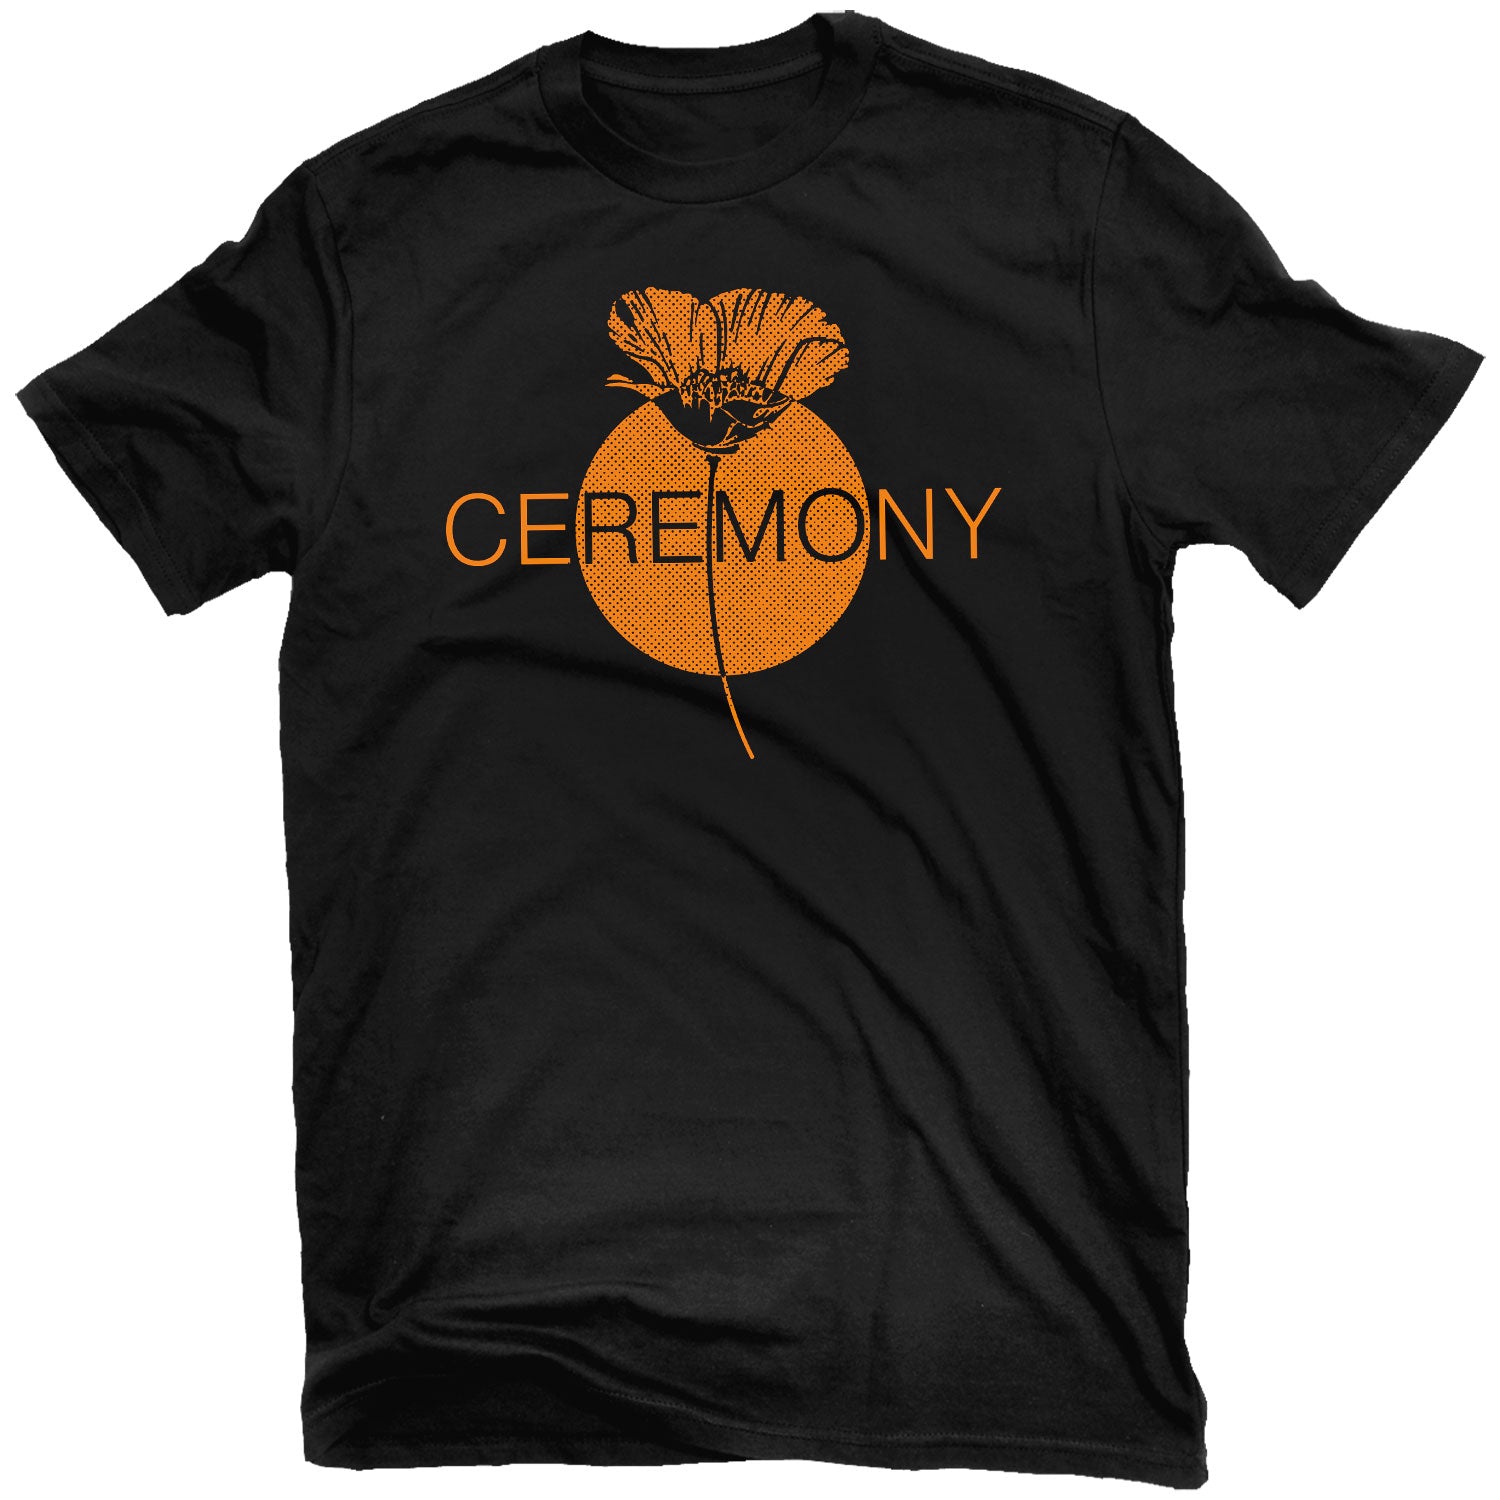 Ceremony "Vanity Spawned By Fear" T-Shirt